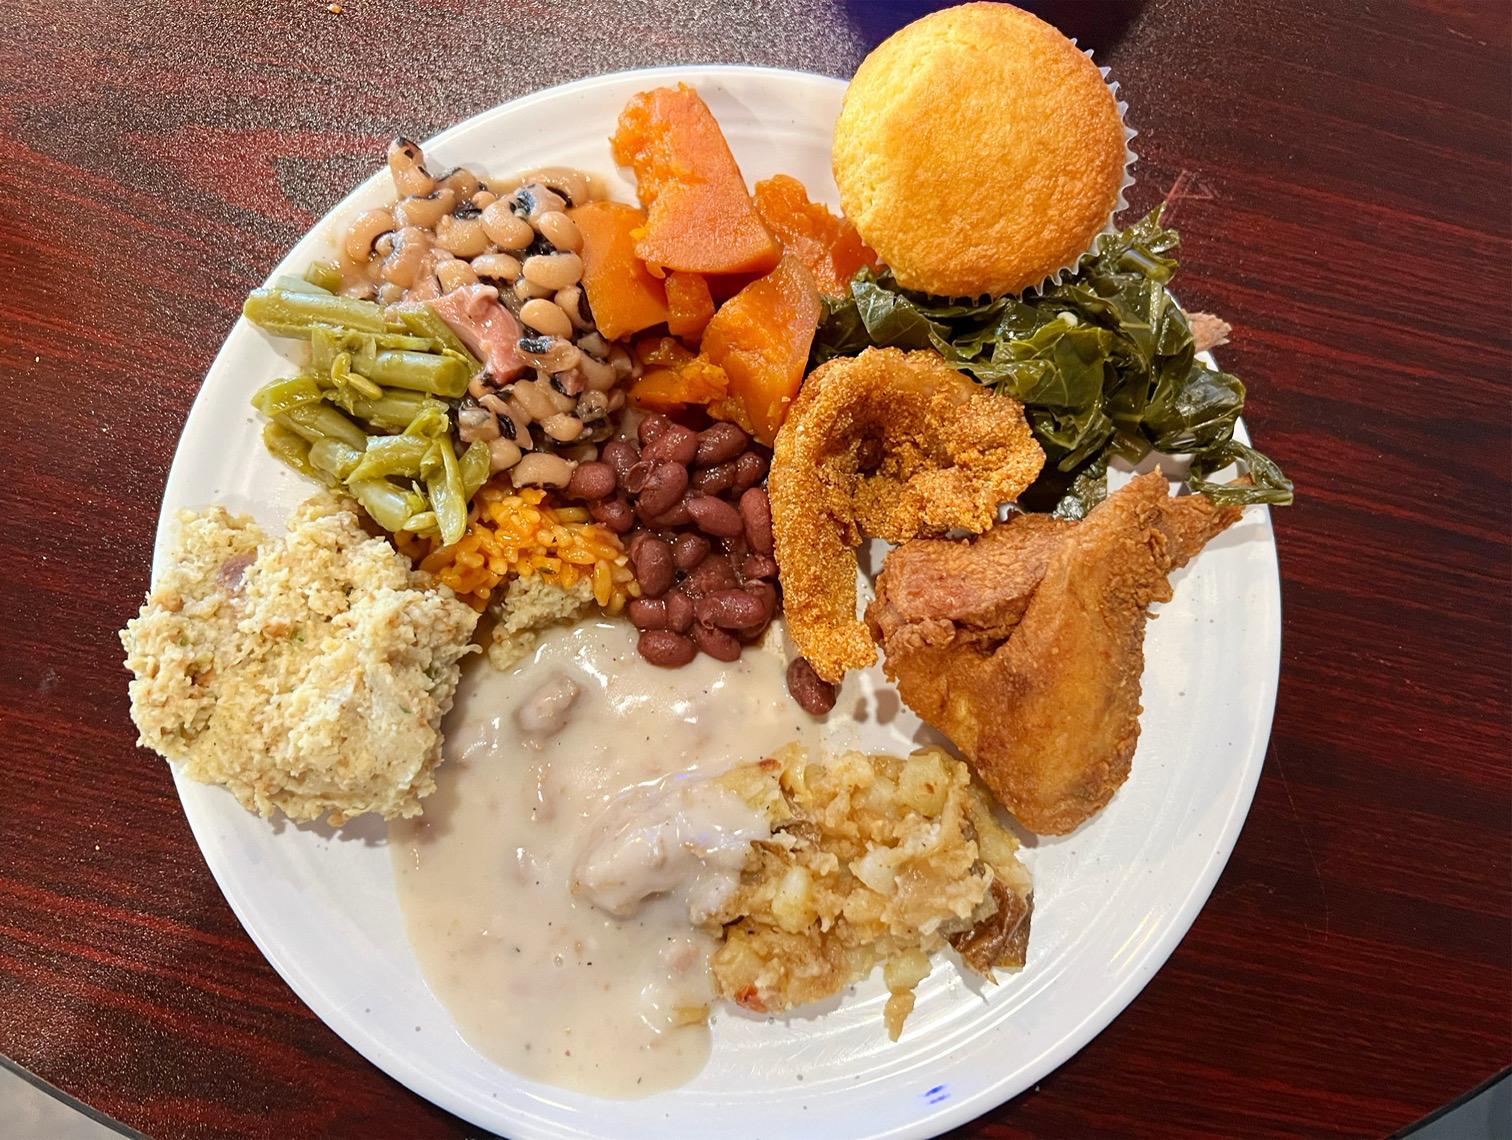 The author's second plate of food with less food than the first plate, but still featuring small scoops of the buffet. Photo by Alyssa Buckley.